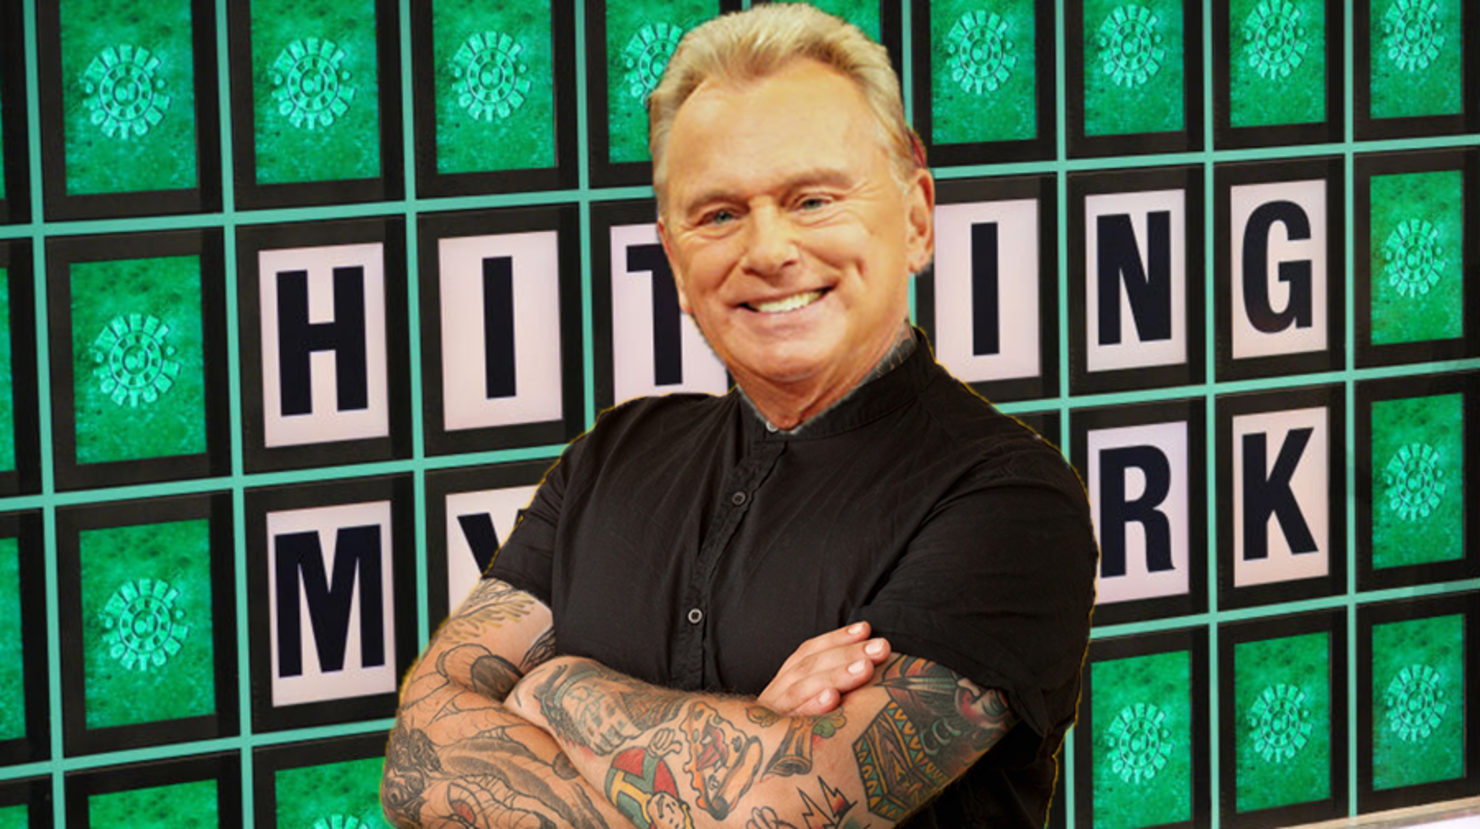 No, Pat Sajak Is Not Getting A Tattoo To 'Look Cool' | iHeart